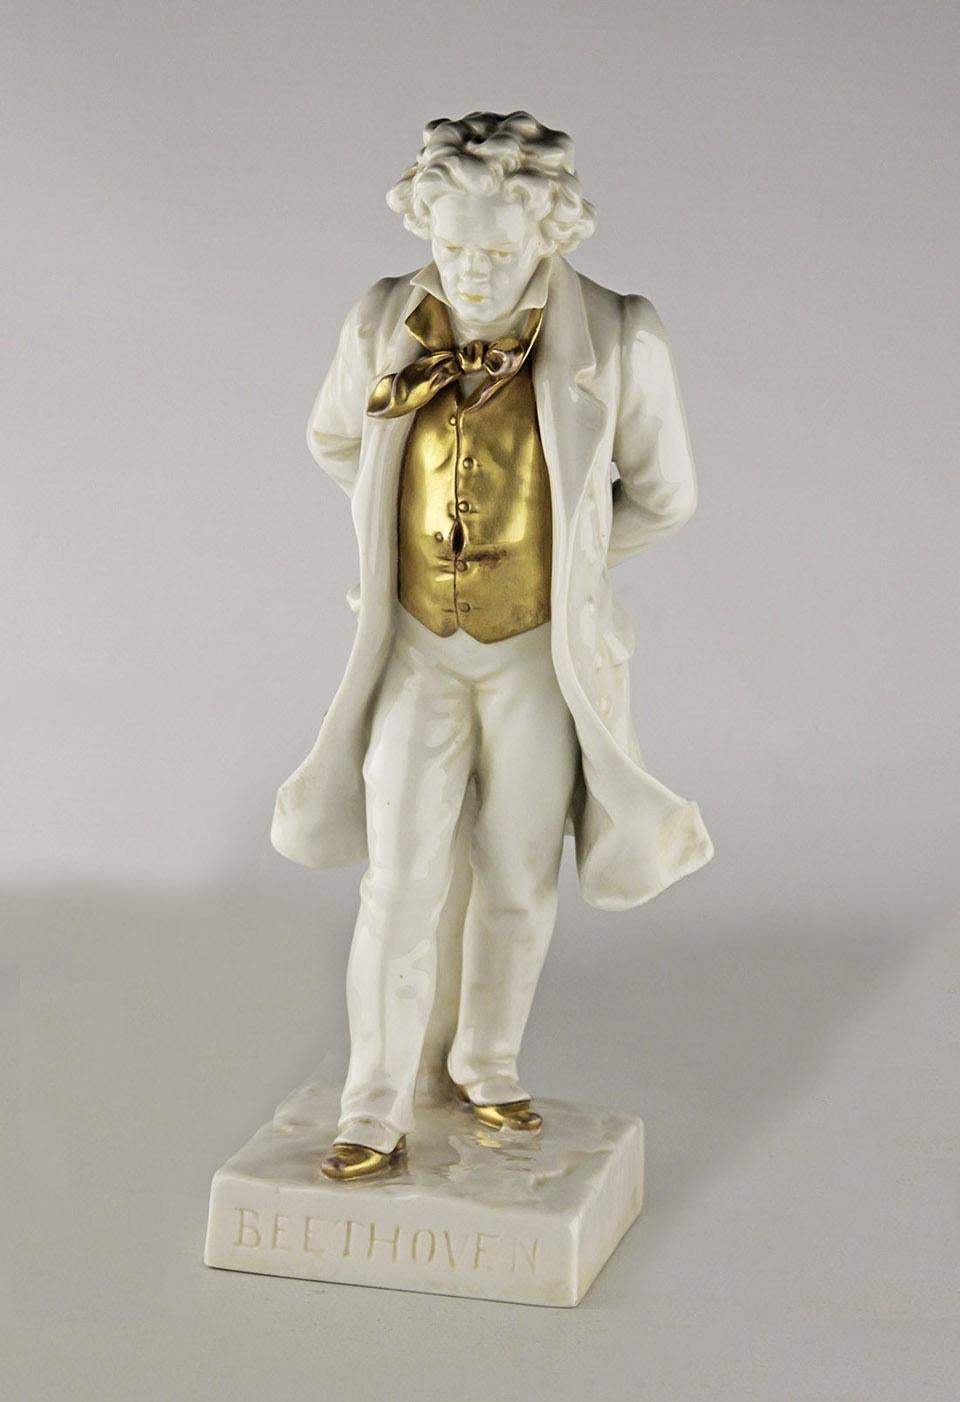 Early 20th century french glazed and gilt porcelain Beethoven sculpture with base

By: unknown
Material: paint, porcelain
Technique: molded, pressed, hand-painted, gilt, glazed
Date: early 20th century
Style: Art Nouveau, Bélle Époque
Place of